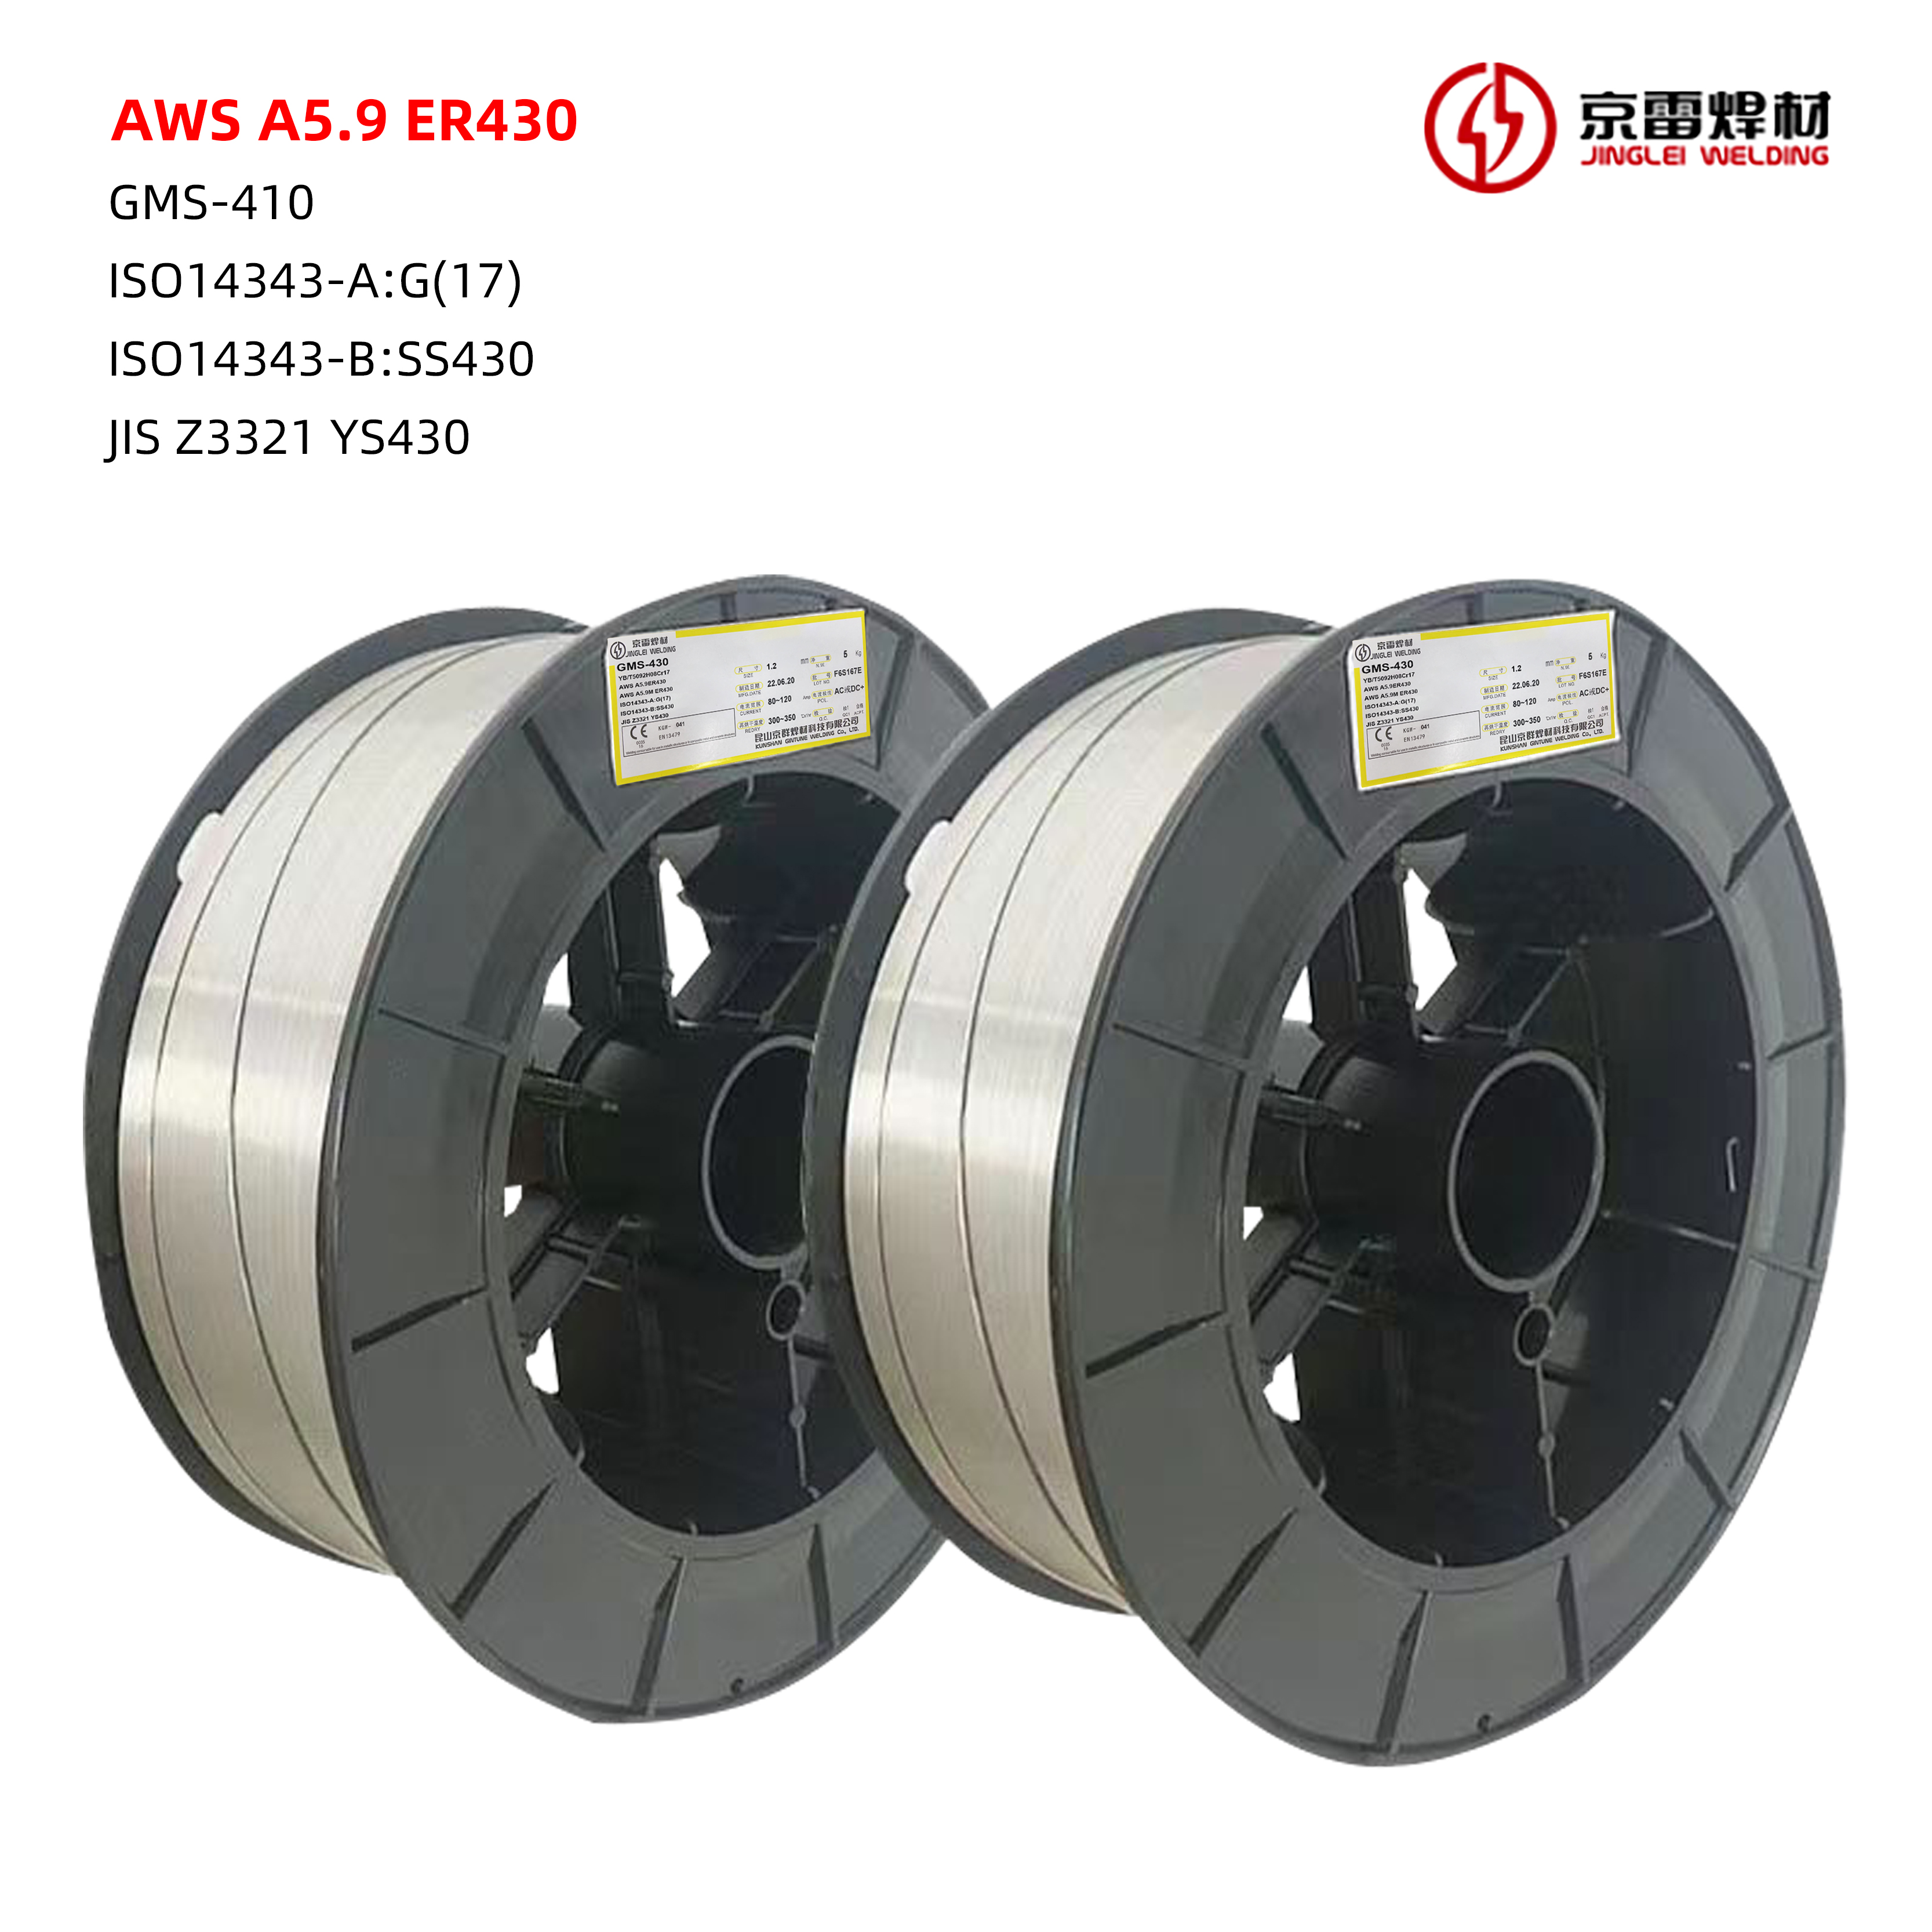 MIG Welding Wire For Stainless Steel ER430 HNHS phenol recovery tower point welding